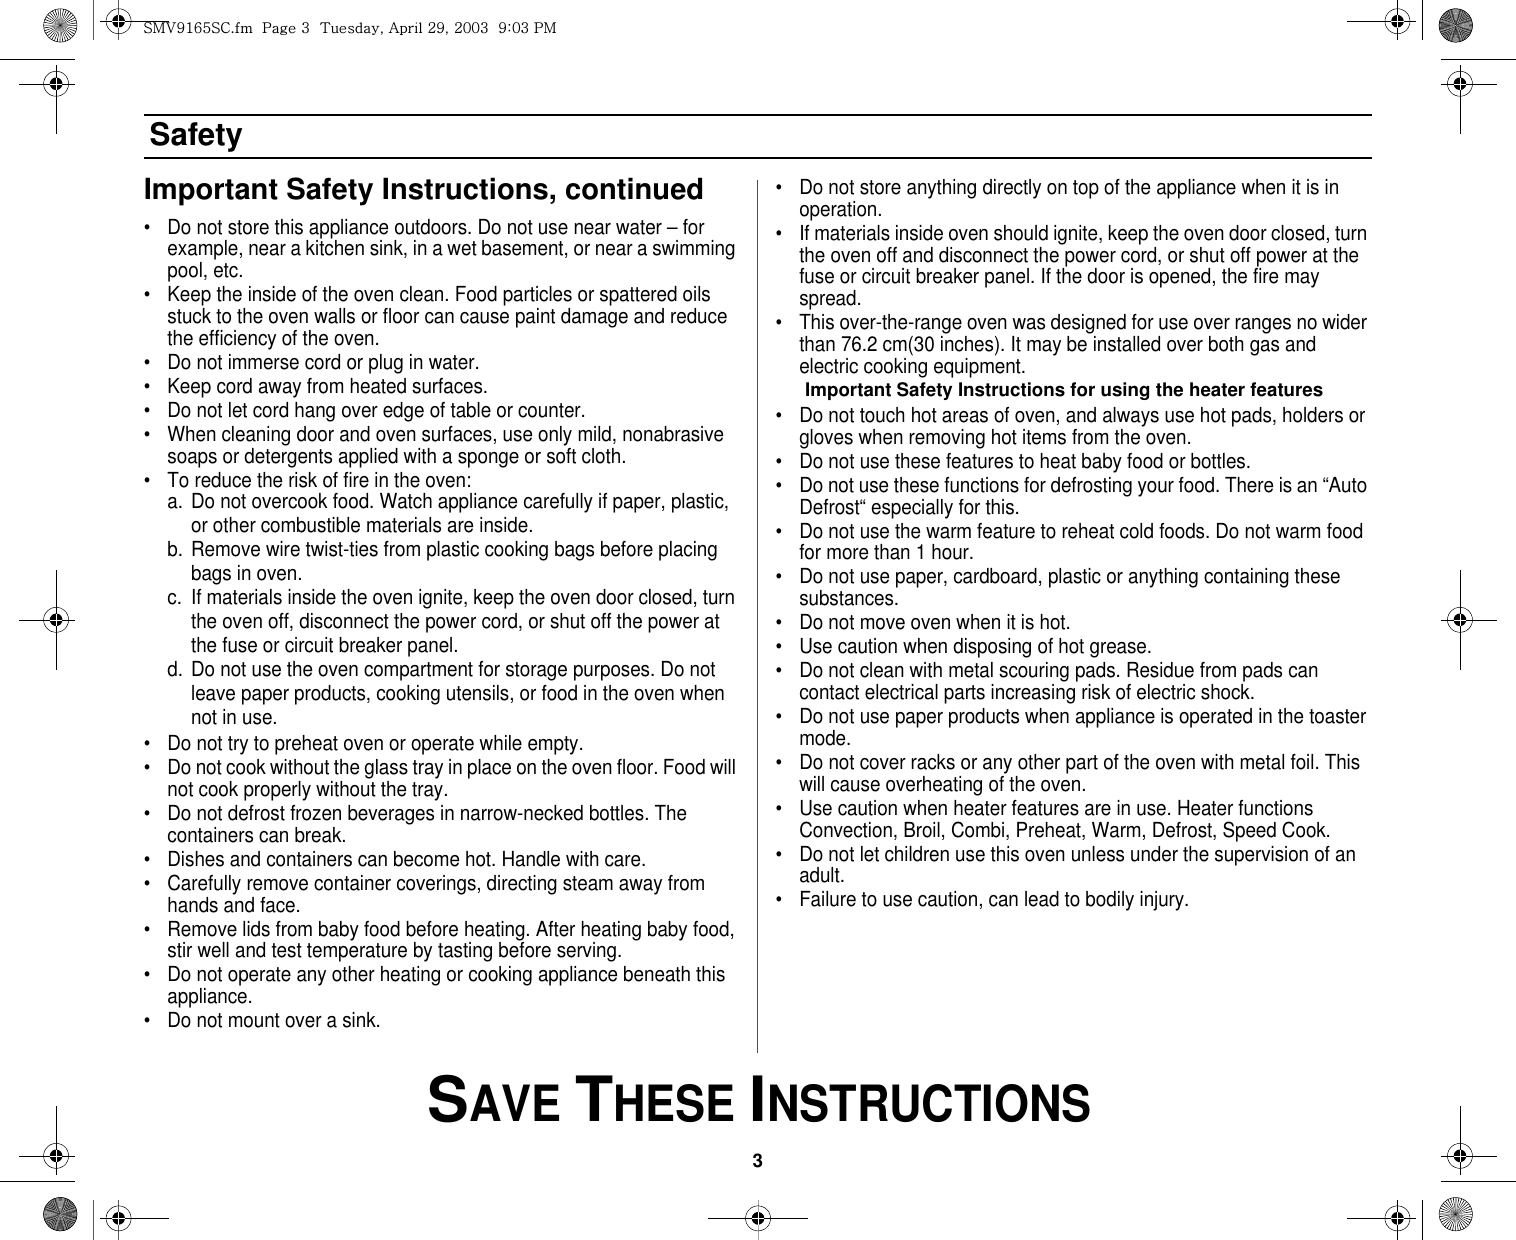 3 SAVE THESE INSTRUCTIONSSafetyImportant Safety Instructions, continued• Do not store this appliance outdoors. Do not use near water – for example, near a kitchen sink, in a wet basement, or near a swimming pool, etc. • Keep the inside of the oven clean. Food particles or spattered oils stuck to the oven walls or floor can cause paint damage and reduce the efficiency of the oven.• Do not immerse cord or plug in water.• Keep cord away from heated surfaces.• Do not let cord hang over edge of table or counter.• When cleaning door and oven surfaces, use only mild, nonabrasive soaps or detergents applied with a sponge or soft cloth.• To reduce the risk of fire in the oven:a. Do not overcook food. Watch appliance carefully if paper, plastic, or other combustible materials are inside.b. Remove wire twist-ties from plastic cooking bags before placing bags in oven.c. If materials inside the oven ignite, keep the oven door closed, turn the oven off, disconnect the power cord, or shut off the power at the fuse or circuit breaker panel.d. Do not use the oven compartment for storage purposes. Do not leave paper products, cooking utensils, or food in the oven when not in use.• Do not try to preheat oven or operate while empty.• Do not cook without the glass tray in place on the oven floor. Food will not cook properly without the tray.• Do not defrost frozen beverages in narrow-necked bottles. The containers can break.• Dishes and containers can become hot. Handle with care.• Carefully remove container coverings, directing steam away from hands and face.• Remove lids from baby food before heating. After heating baby food, stir well and test temperature by tasting before serving.• Do not operate any other heating or cooking appliance beneath this appliance.• Do not mount over a sink.• Do not store anything directly on top of the appliance when it is in operation.• If materials inside oven should ignite, keep the oven door closed, turn the oven off and disconnect the power cord, or shut off power at the fuse or circuit breaker panel. If the door is opened, the fire may spread.• This over-the-range oven was designed for use over ranges no wider than 76.2 cm(30 inches). It may be installed over both gas and electric cooking equipment.Important Safety Instructions for using the heater features• Do not touch hot areas of oven, and always use hot pads, holders or gloves when removing hot items from the oven.• Do not use these features to heat baby food or bottles.• Do not use these functions for defrosting your food. There is an “Auto Defrost“ especially for this.• Do not use the warm feature to reheat cold foods. Do not warm food for more than 1 hour.• Do not use paper, cardboard, plastic or anything containing these substances.• Do not move oven when it is hot.• Use caution when disposing of hot grease.• Do not clean with metal scouring pads. Residue from pads can contact electrical parts increasing risk of electric shock. • Do not use paper products when appliance is operated in the toaster mode.• Do not cover racks or any other part of the oven with metal foil. This will cause overheating of the oven.• Use caution when heater features are in use. Heater functions Convection, Broil, Combi, Preheat, Warm, Defrost, Speed Cook. • Do not let children use this oven unless under the supervision of an adult.• Failure to use caution, can lead to bodily injury.zt}`X]\zjUGGwGZGG{SGhGY`SGYWWZGG`aWZGwt